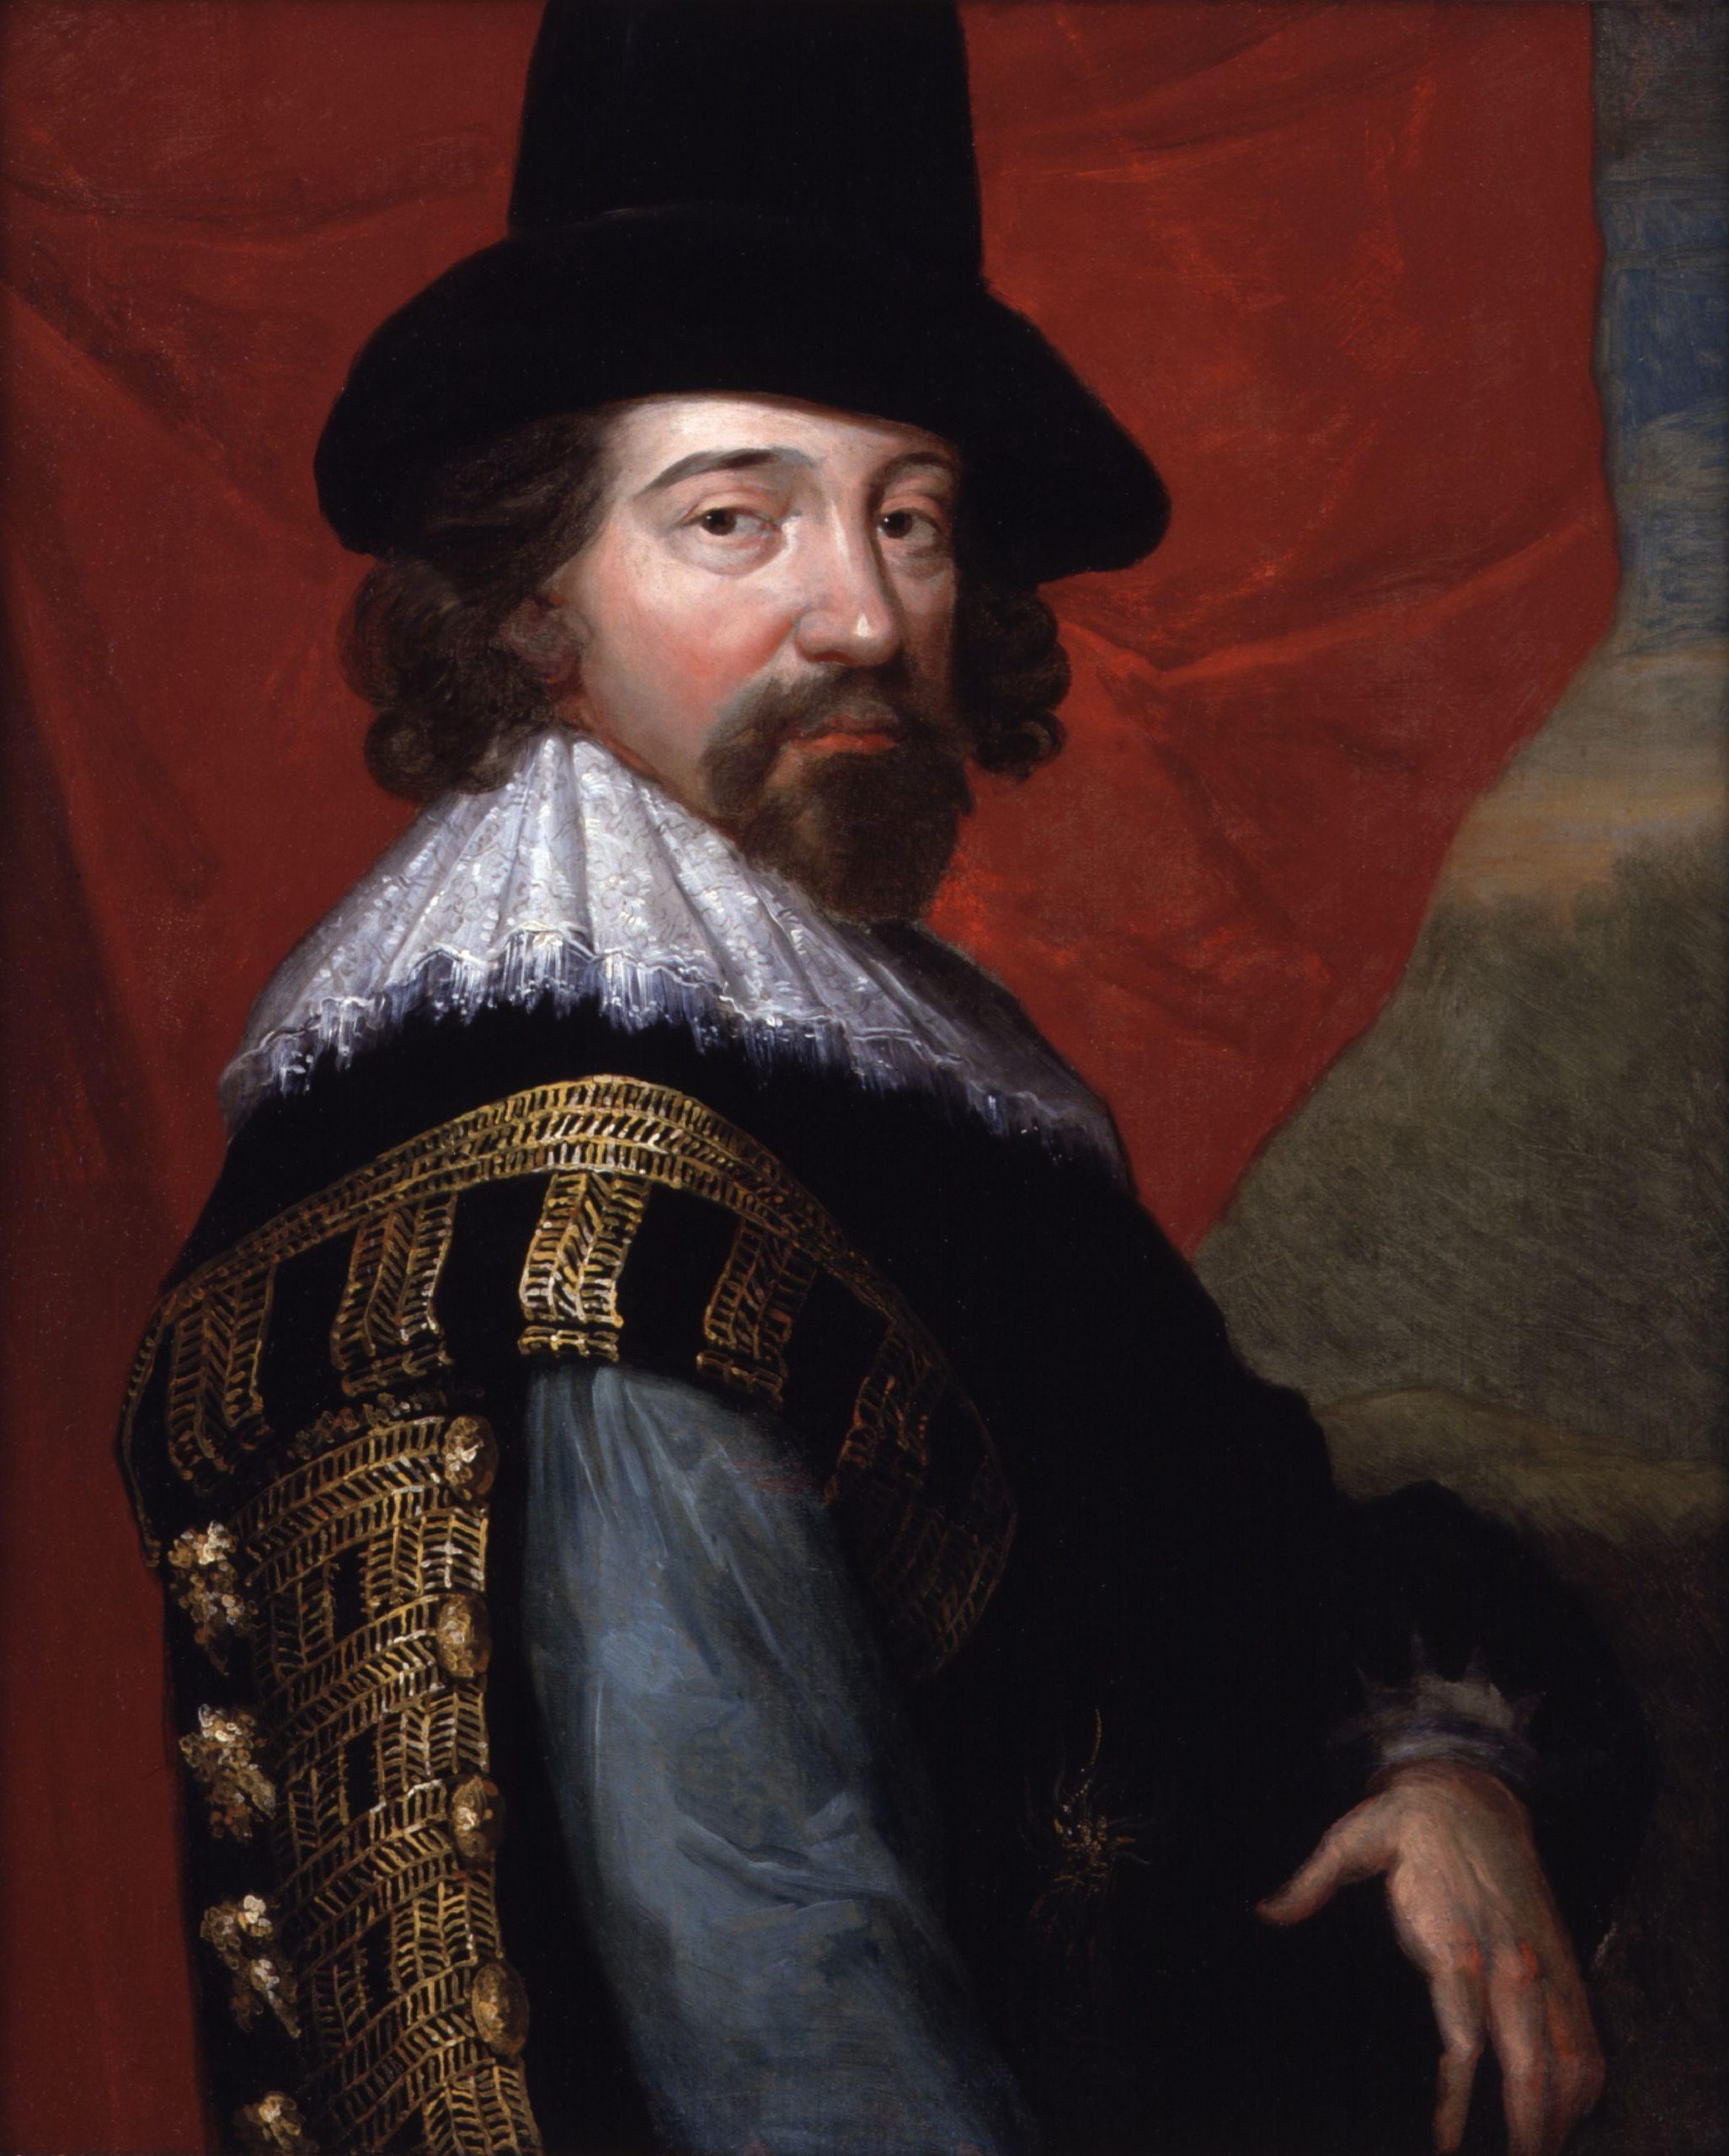 Francis Bacon, Viscount St Alban, by unknown artist. See source website for additional information. Portrait of Francis Bacon, Viscount St Alban, by John Vanderbank, 1731?, after a portrait by an unknown artist (circa 1618) This set of images was gathered by User:Dcoetzee from the National Portrait Gallery, London website using a special tool. All images in this batch have an unknown author, but there is strong evidence it was first published before 1923 (based mainly on the NPG's estimated date of the work).